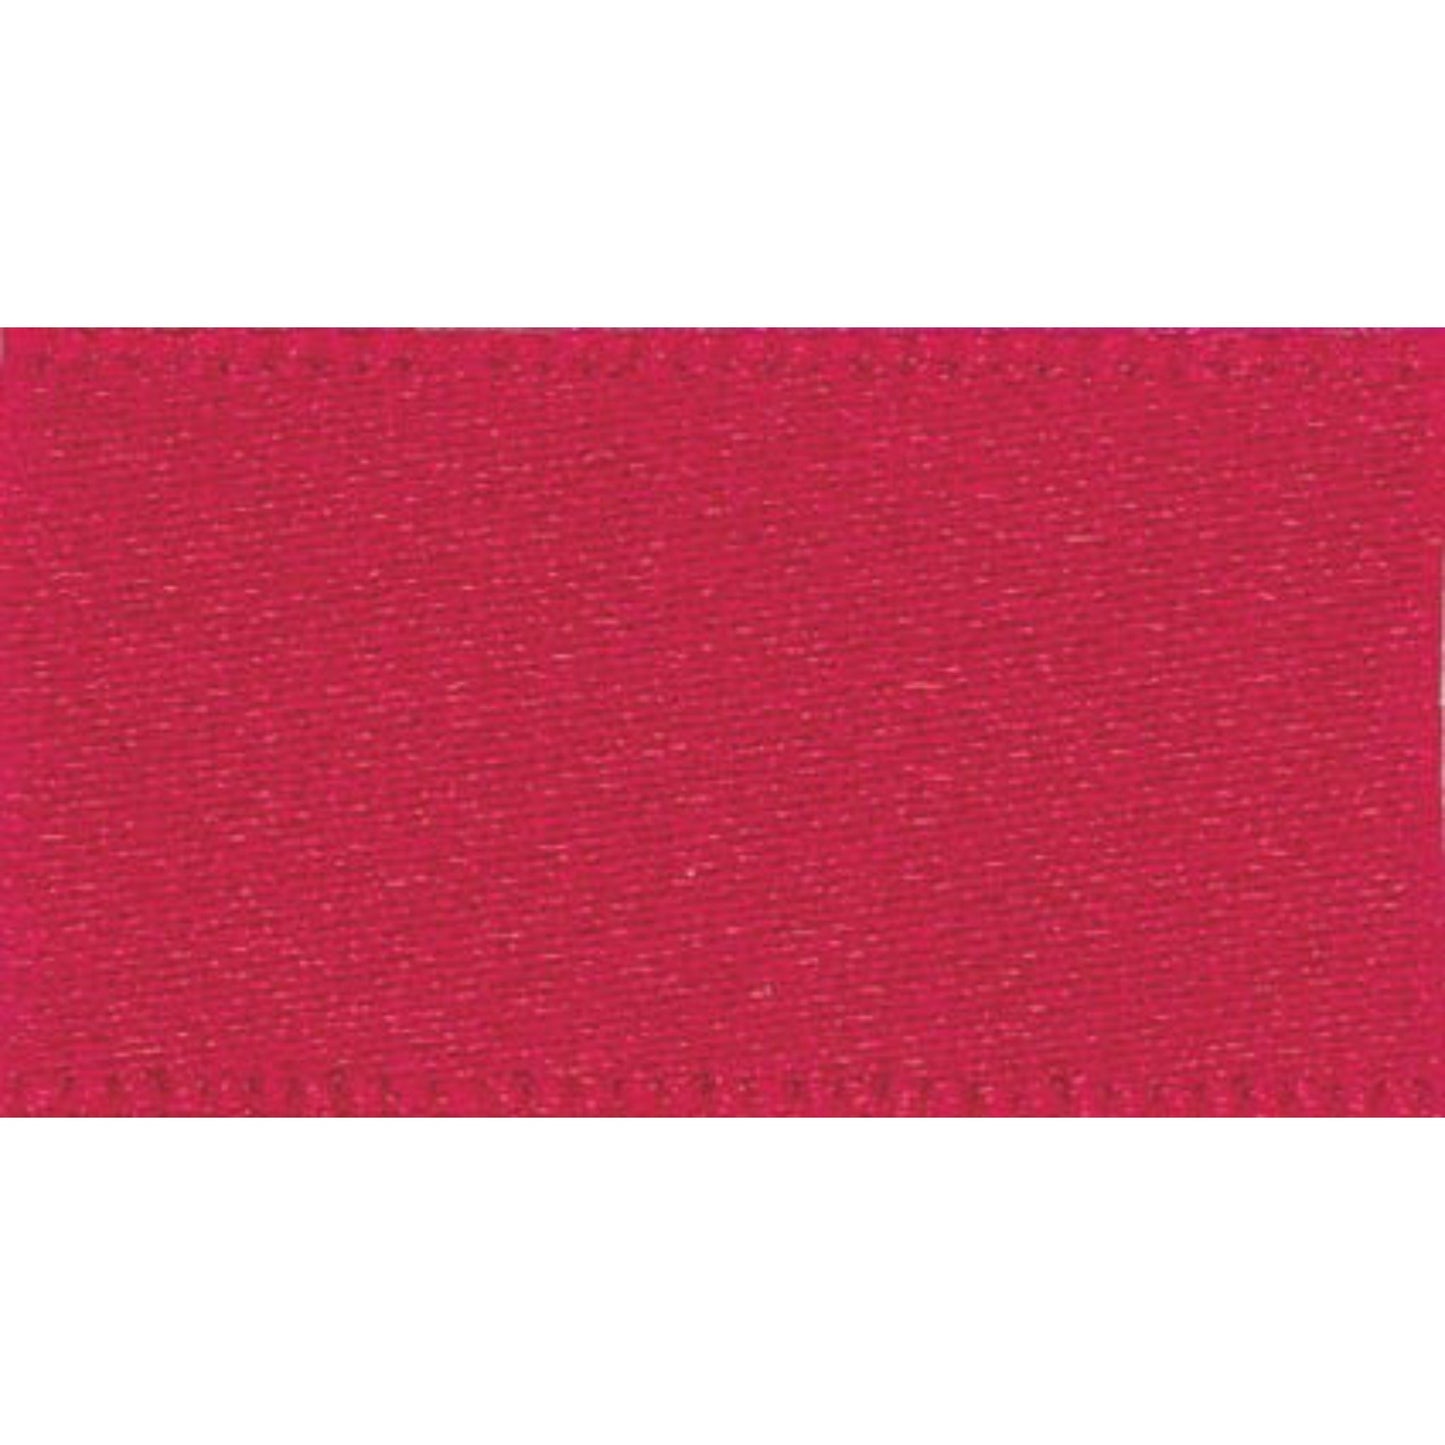 Double Faced Satin Ribbon: Red: 7mm wide. Price per metre.